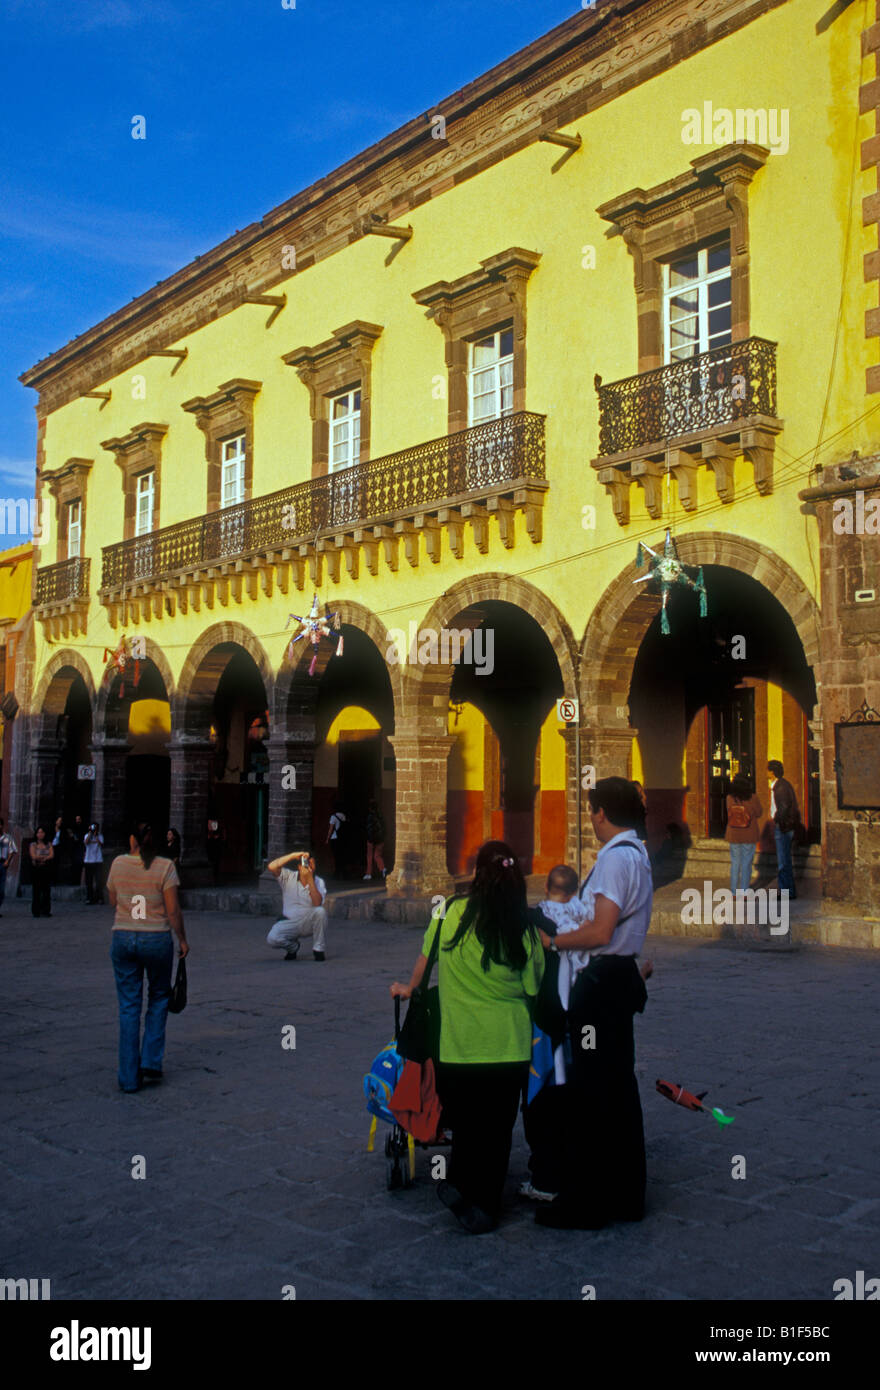 Mexicans, Mexican people, plaza, town of San Miguel de Allende, San Miguel de Allende, Guanajuato State, Mexico Stock Photo